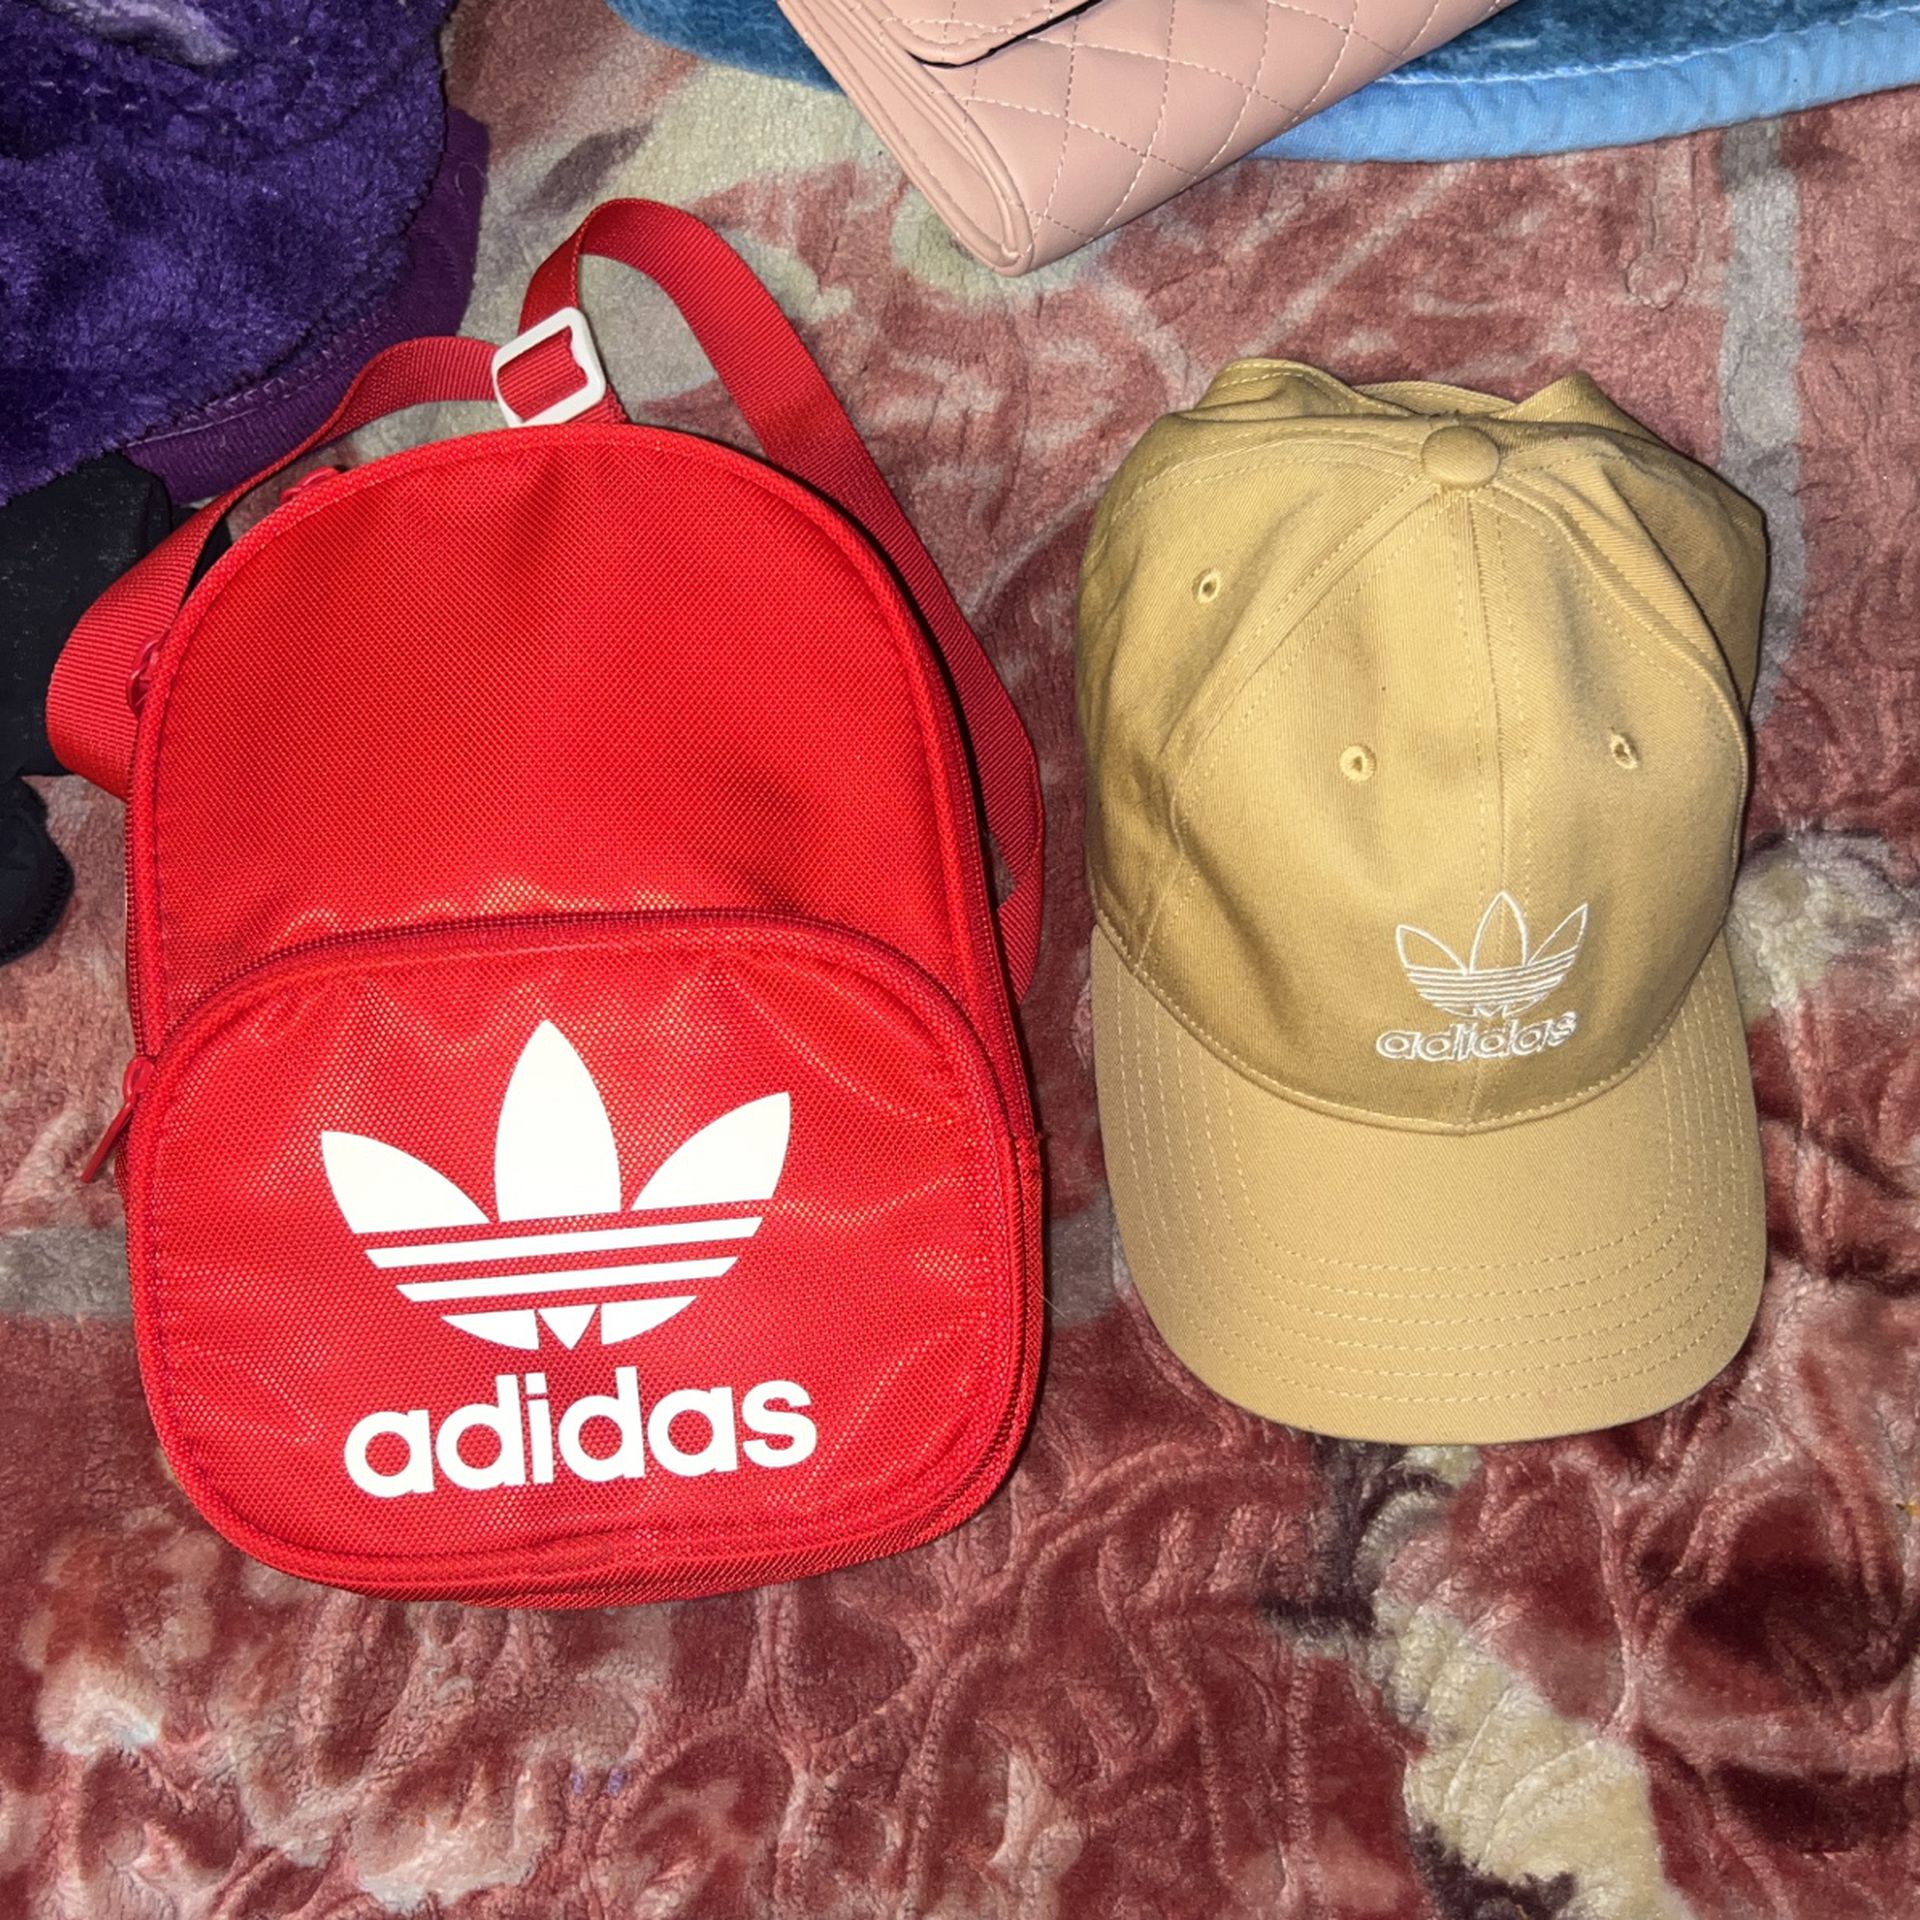 Adidas Mini Red Backpack And Khaki Adidas Hat Both Never Used 